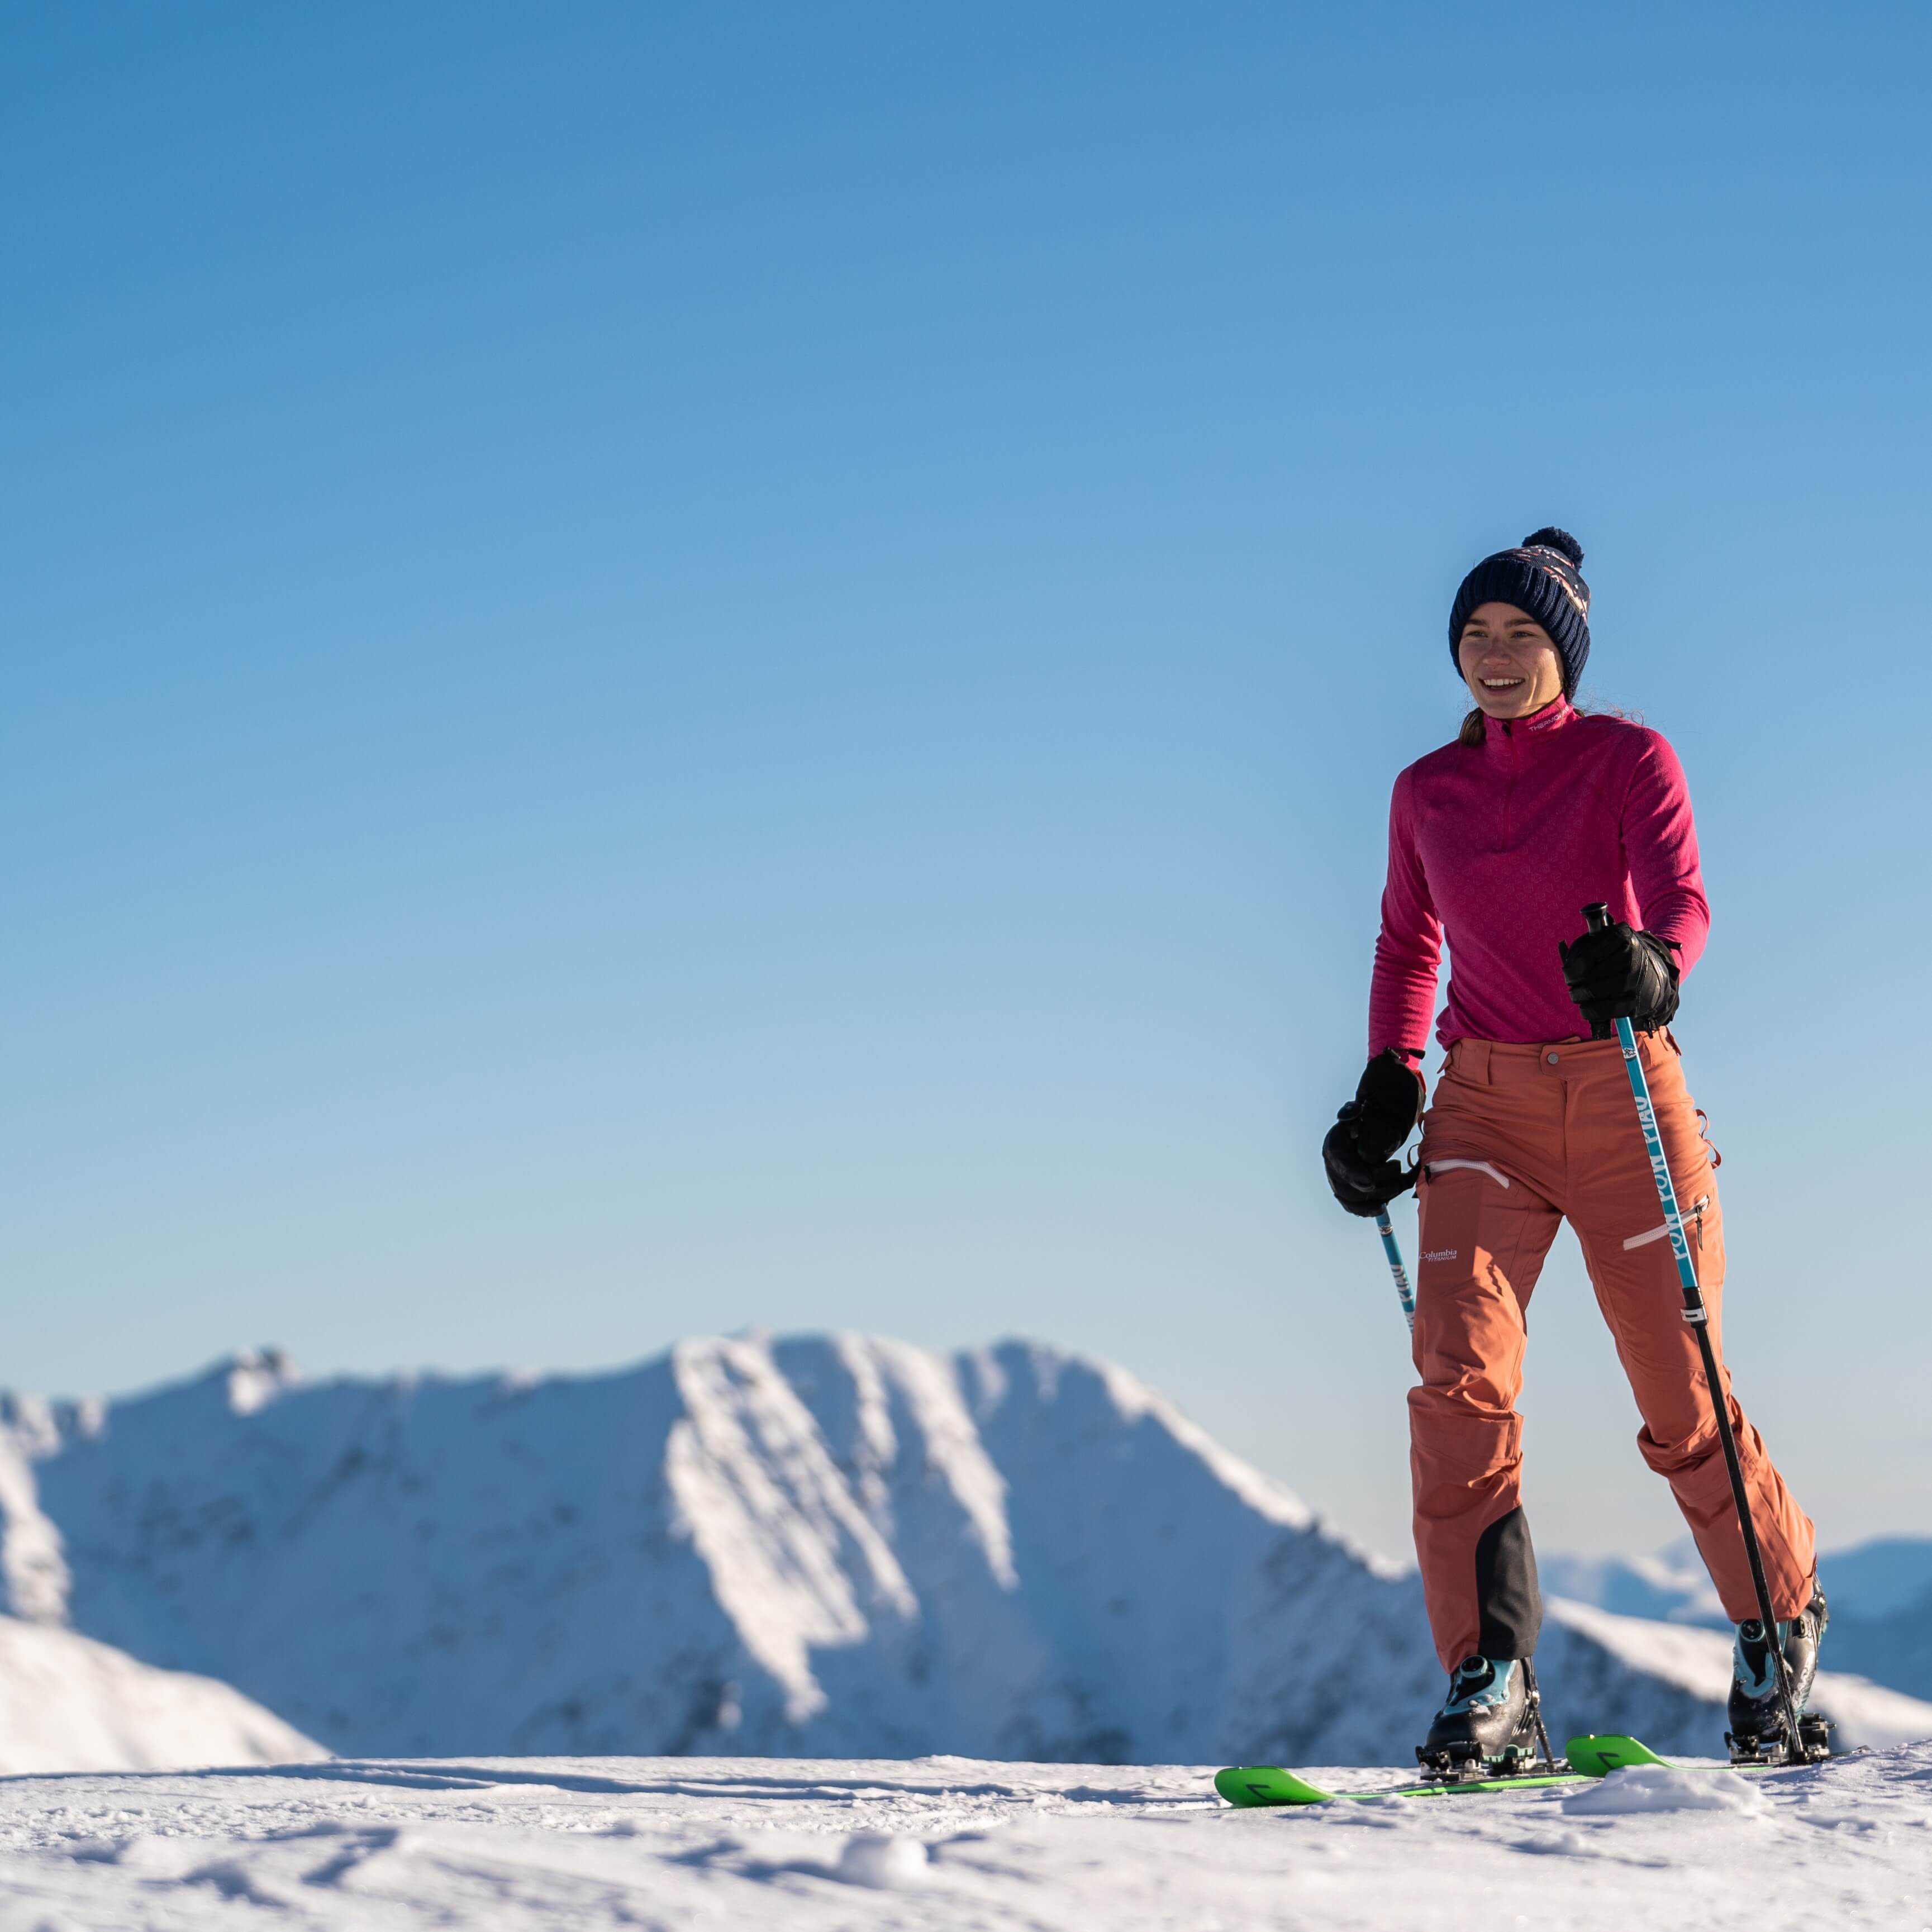 happy-woman-with-pink-thermal-shirt-skiing-in-the-mountains